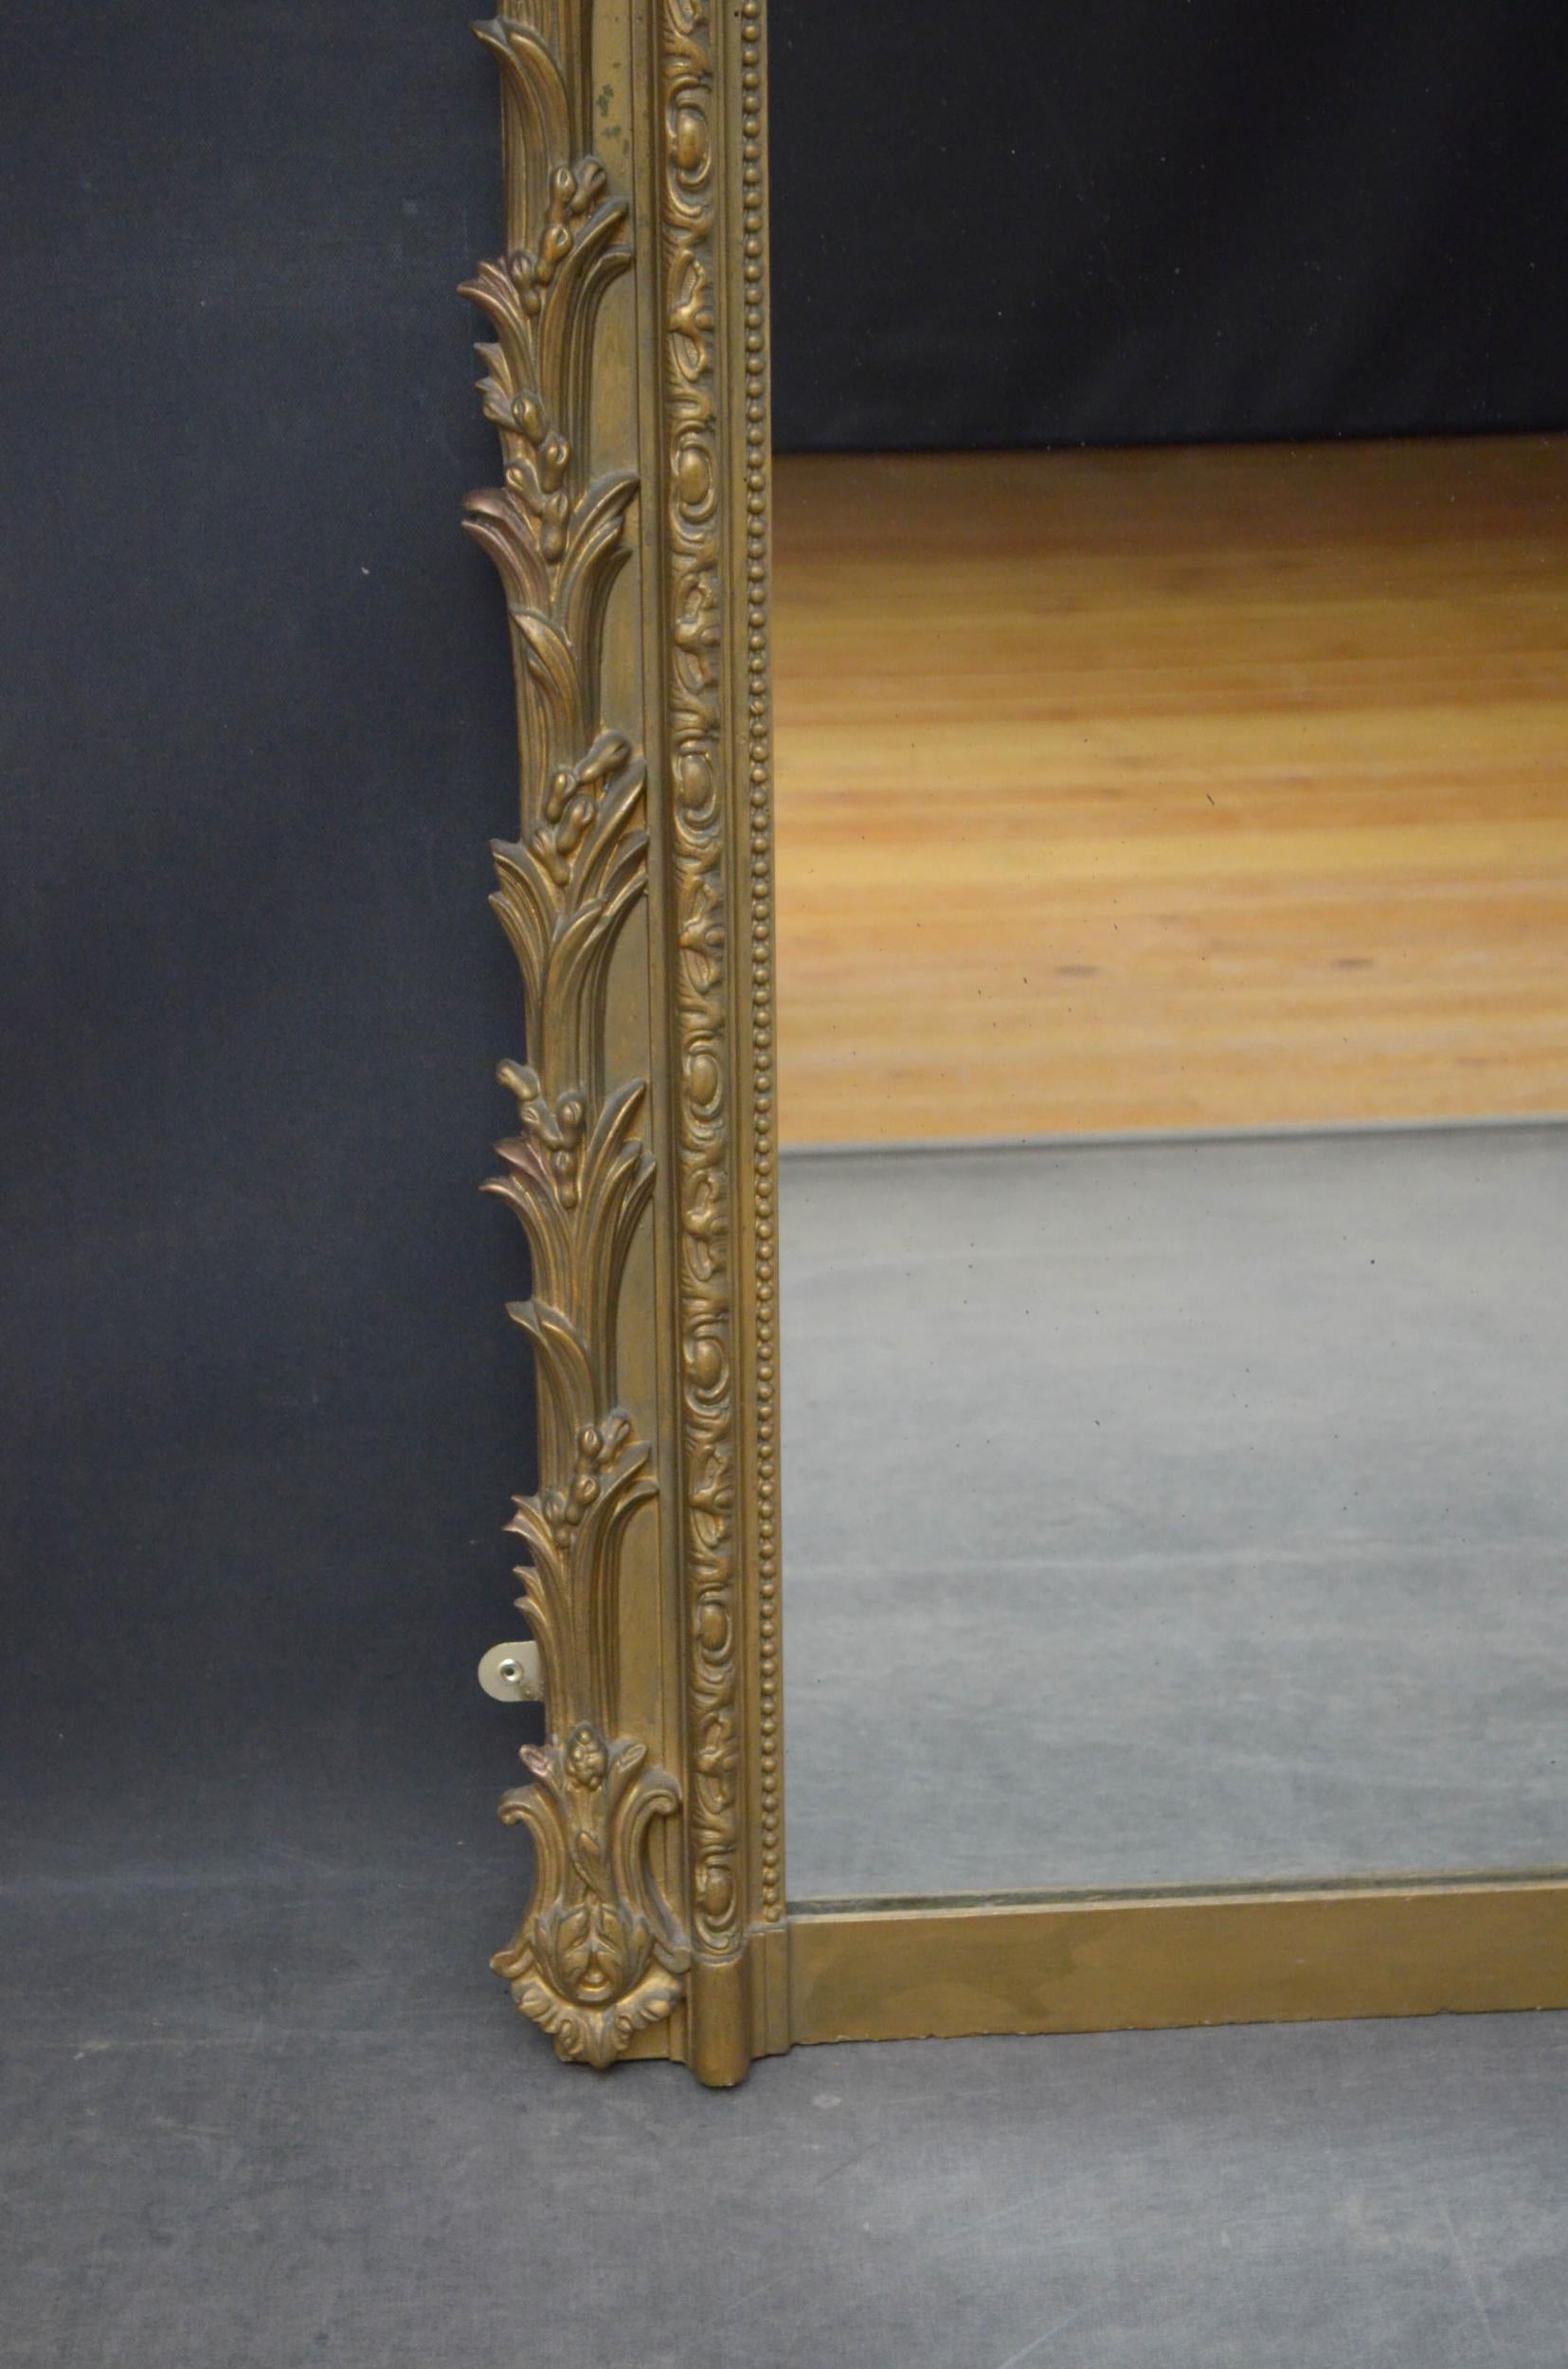 Sn4903 attractive giltwood wall mirror, having original glass with some imperfections in beaded and carved frame with leaf decoration throughout. This antique mirror retains its original glass and backboards with some refinishing, all in home ready